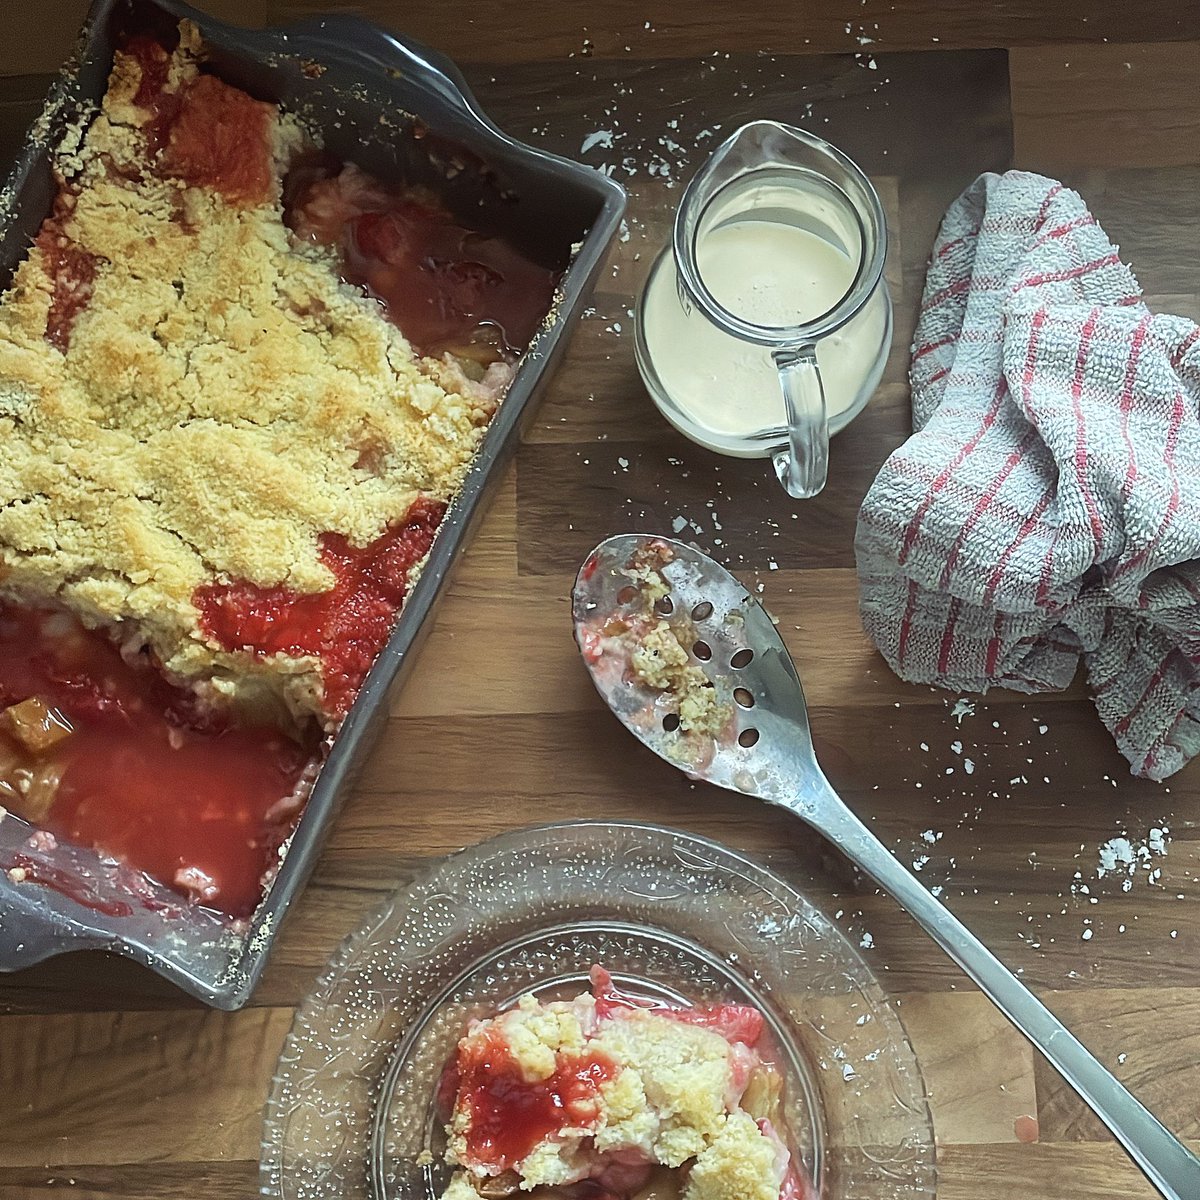 Hey there foodies! Guess what's in season right now? Rhubarb! From rhubarb and custard to rhubarb gin and rhubarb crumble😋 It’s the season! Check out this delicious rhubarb crumble shared by Emily Ashworth, made with fresh rhubarb from the garden!🌱 #FarmingCAN #SeasonalFood